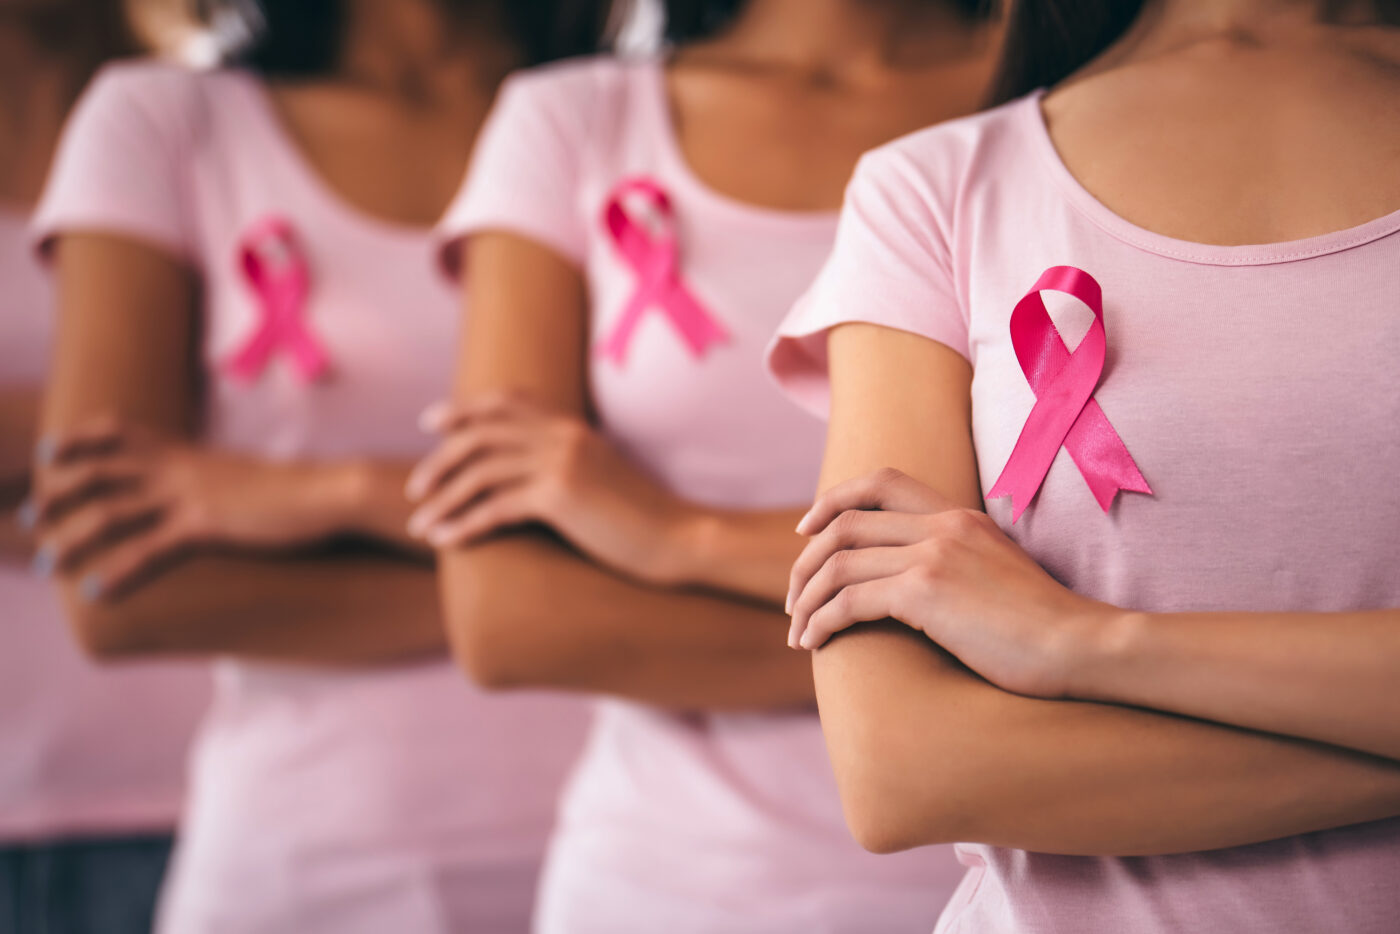 6 Things To Expect During Your Breast Cancer Treatment